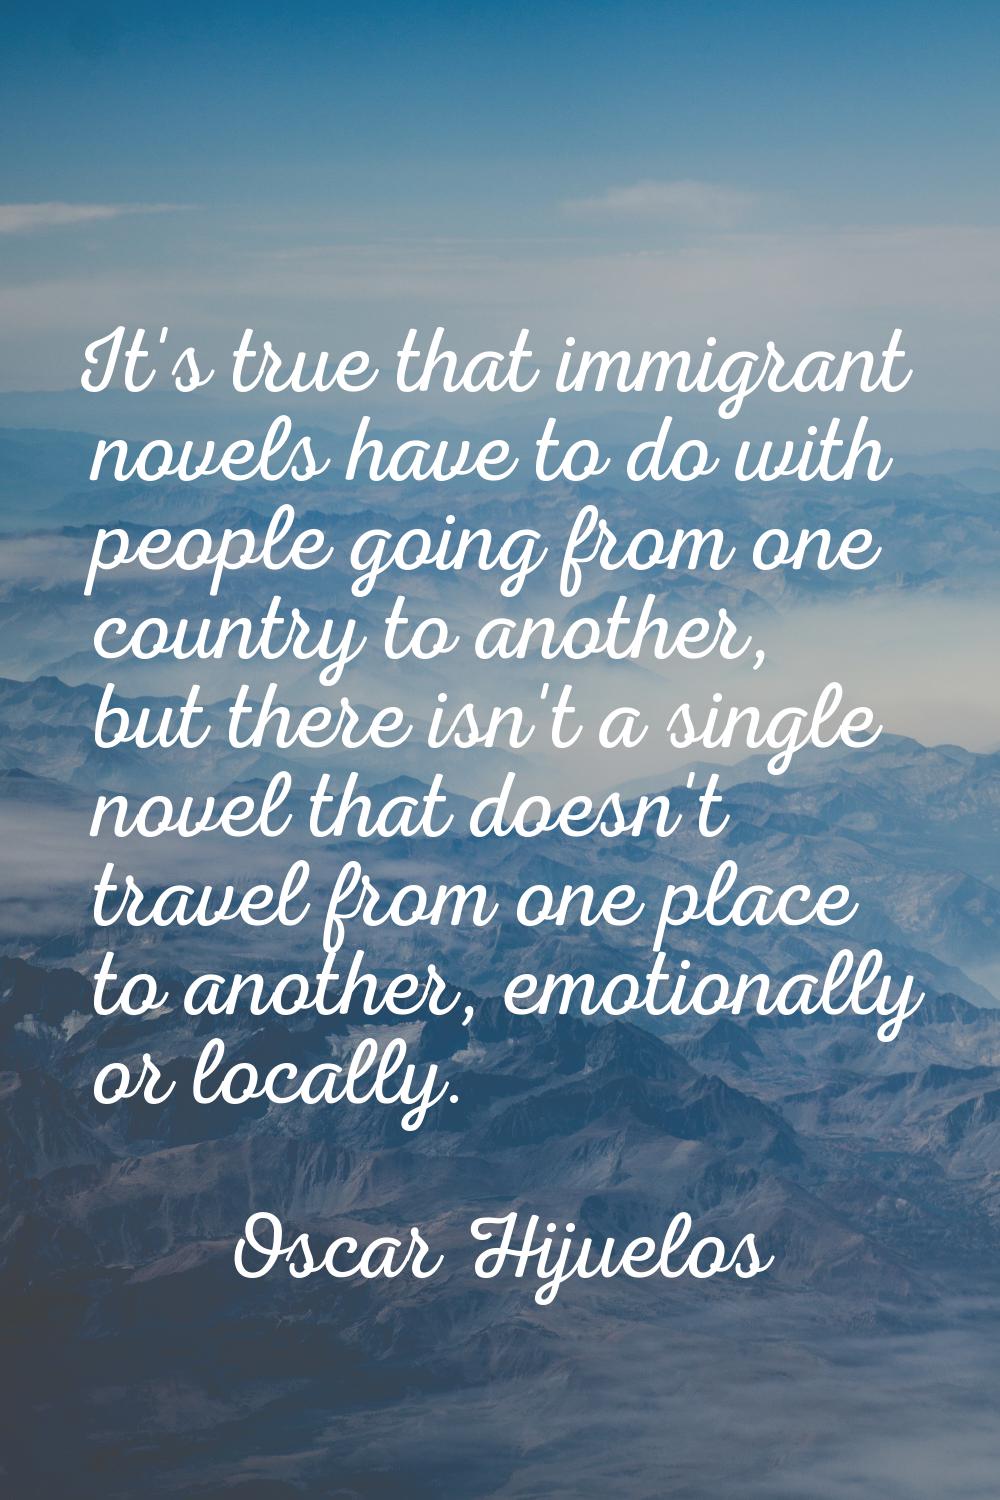 It's true that immigrant novels have to do with people going from one country to another, but there